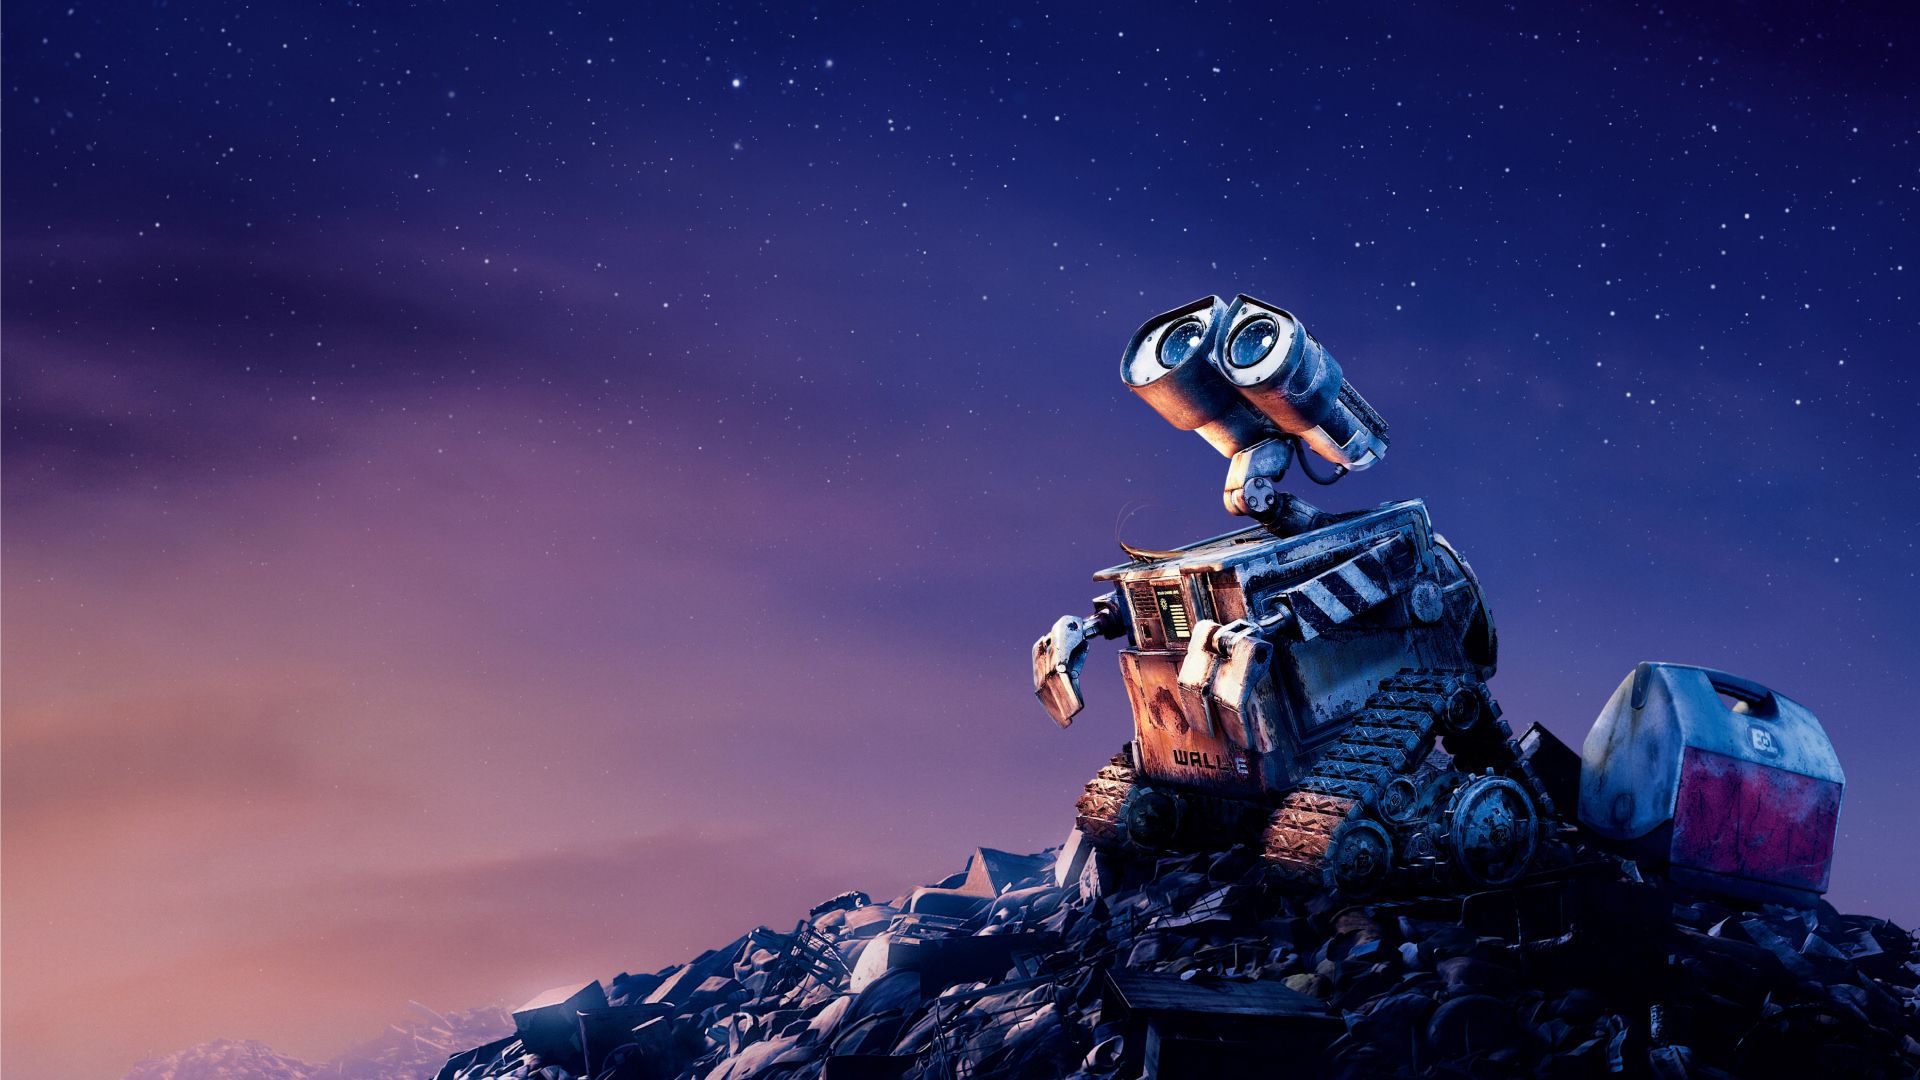 A robot is sitting on top of some rocks - Disney